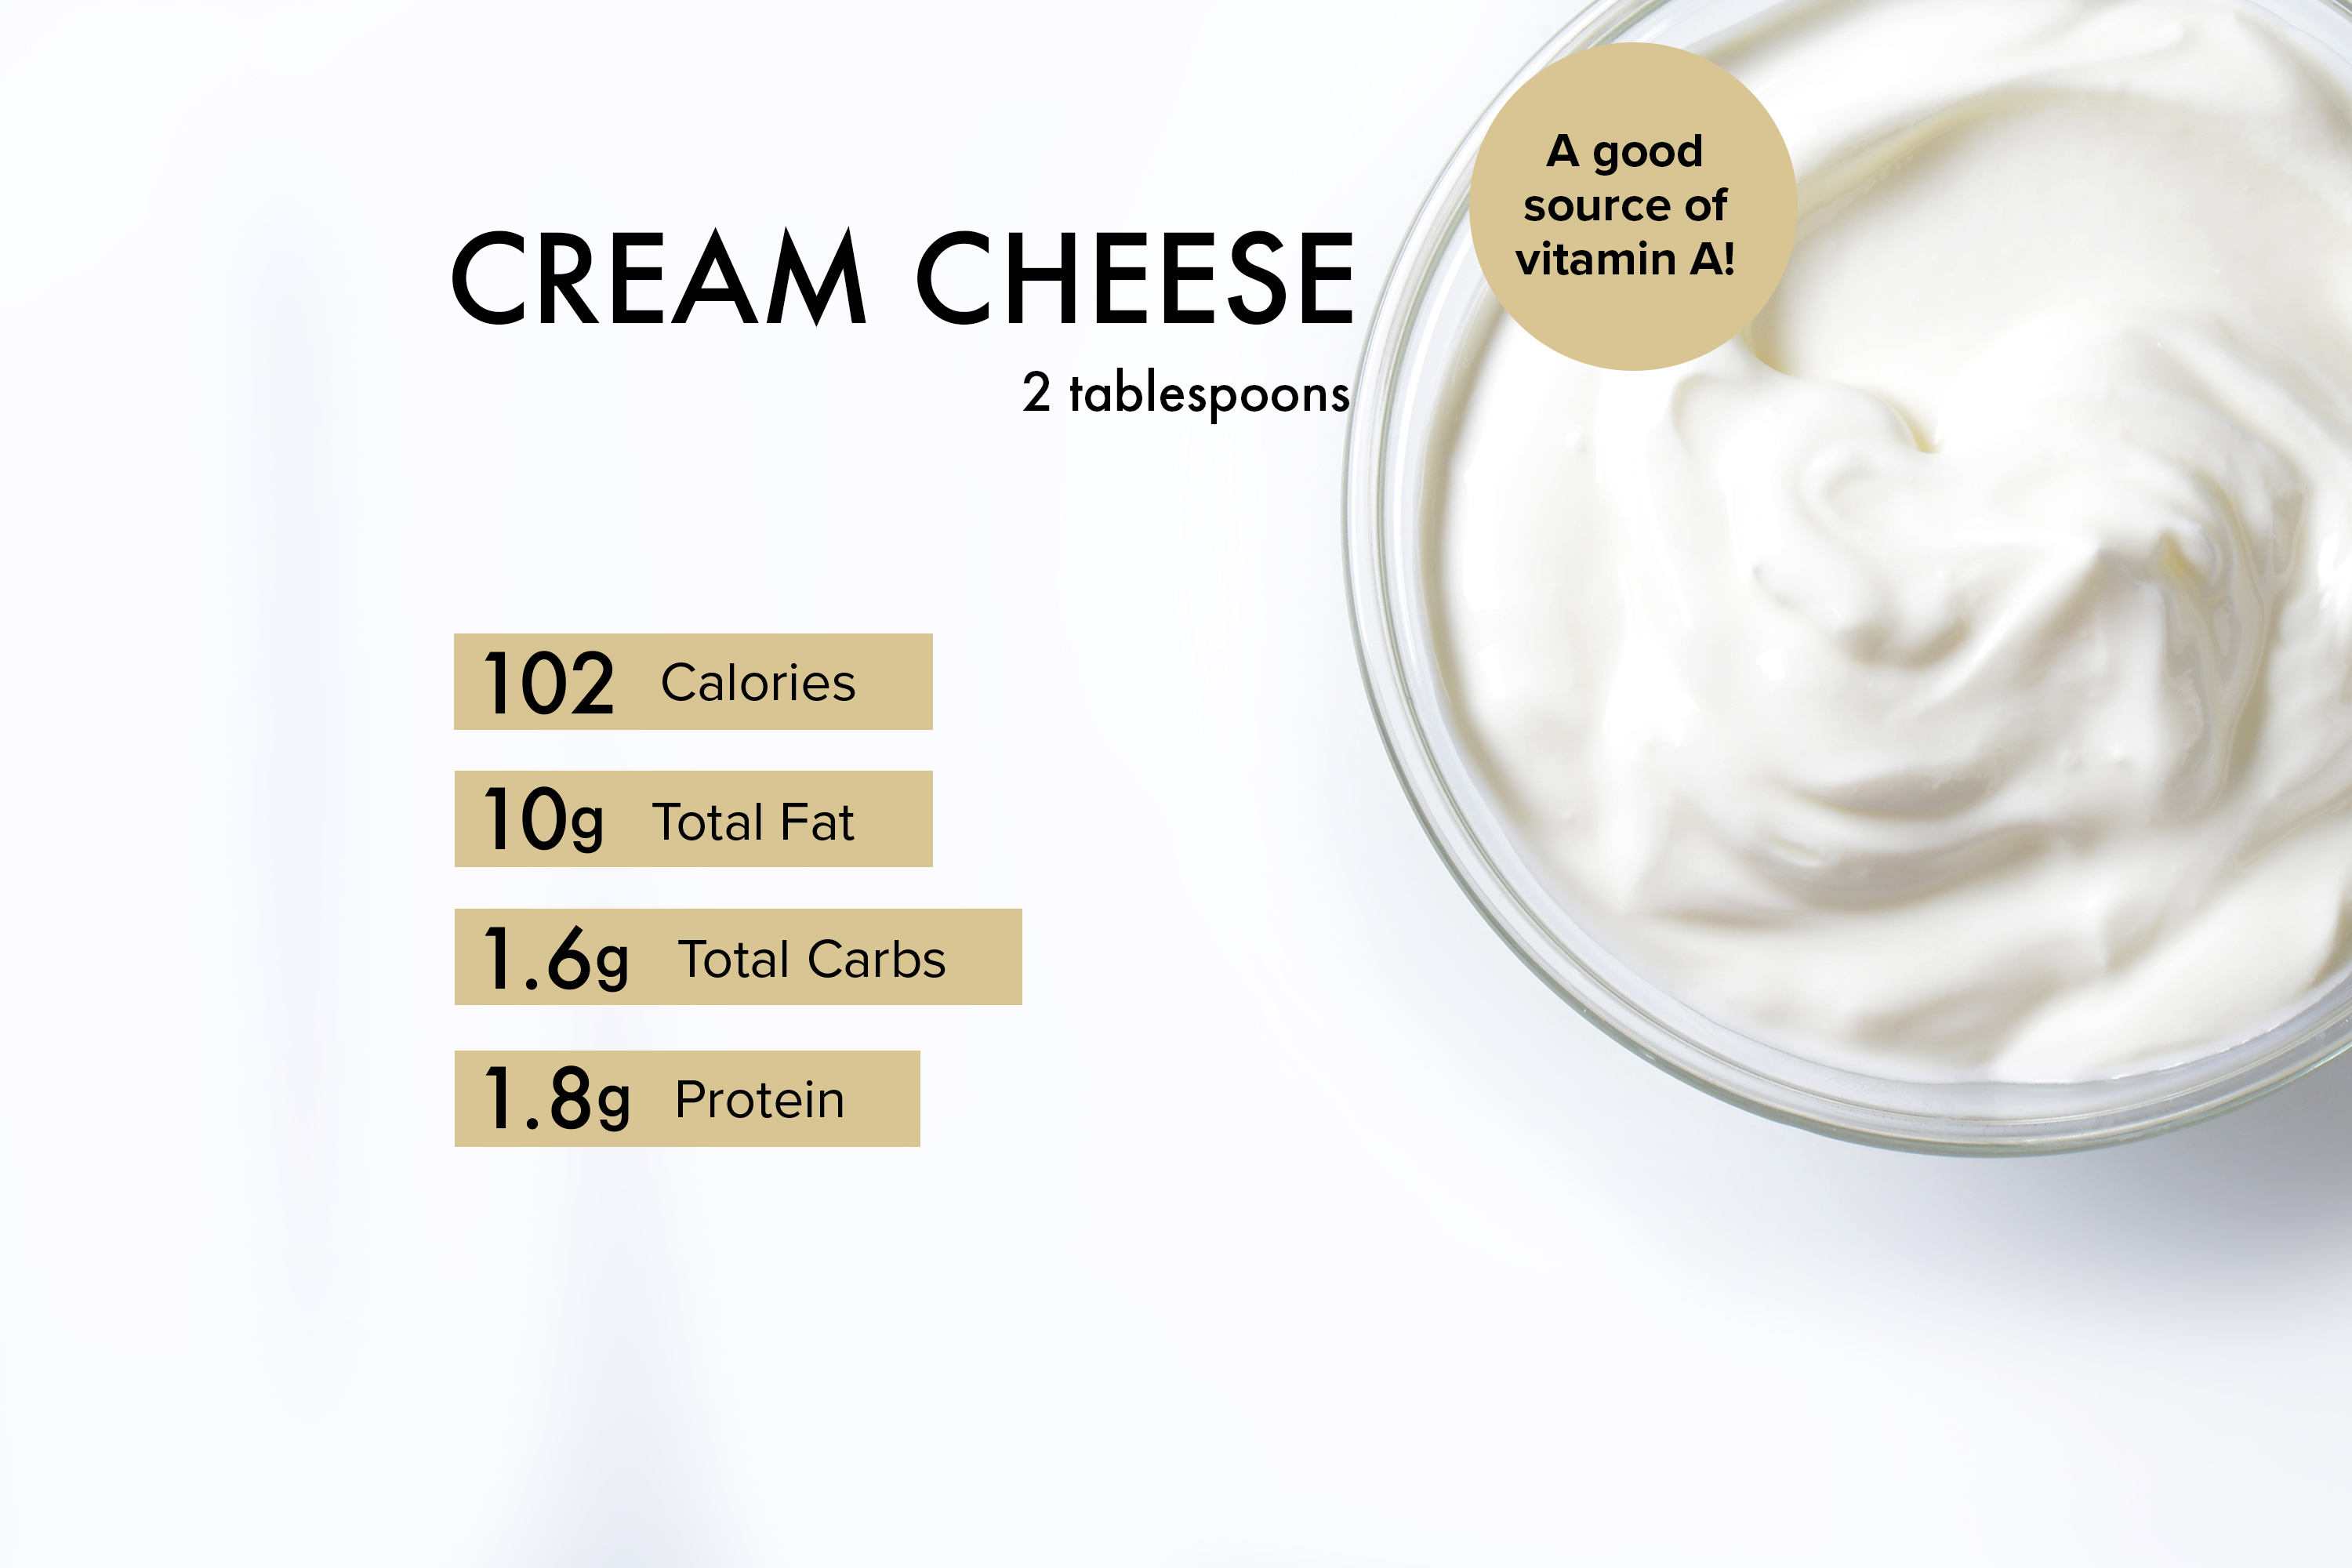 Cream Cheese: Benefits, Nutrition, and Risks